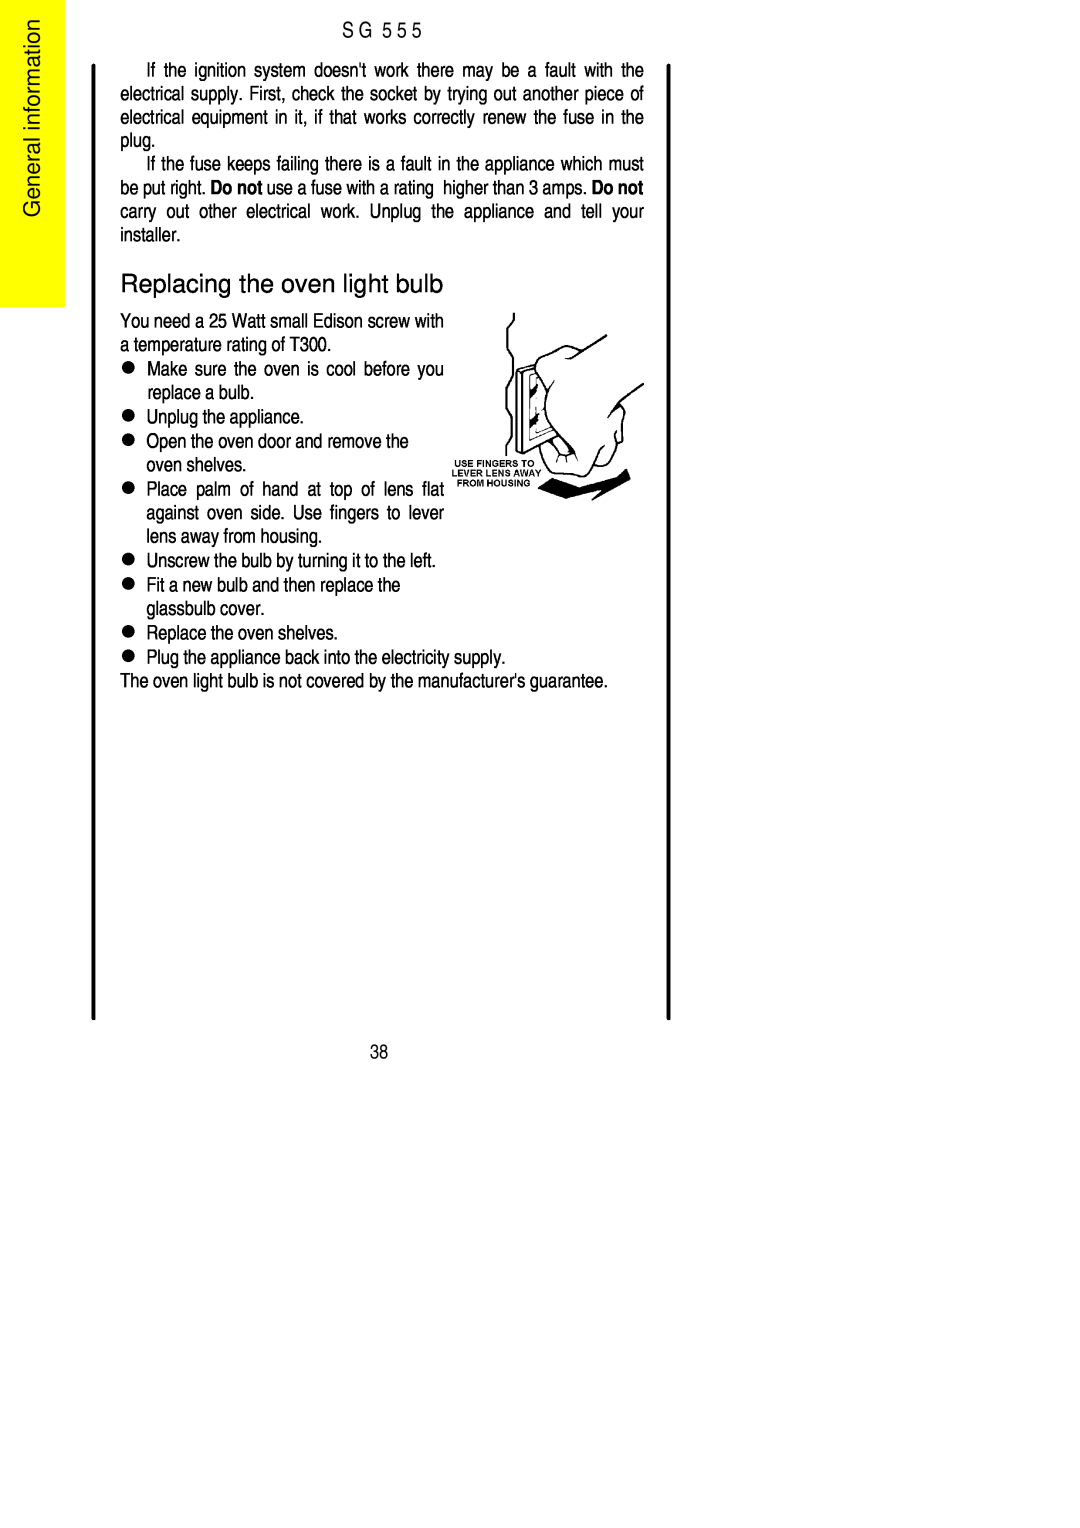 Electrolux SG 555 installation instructions Replacing the oven light bulb, General information, S G 5 5 